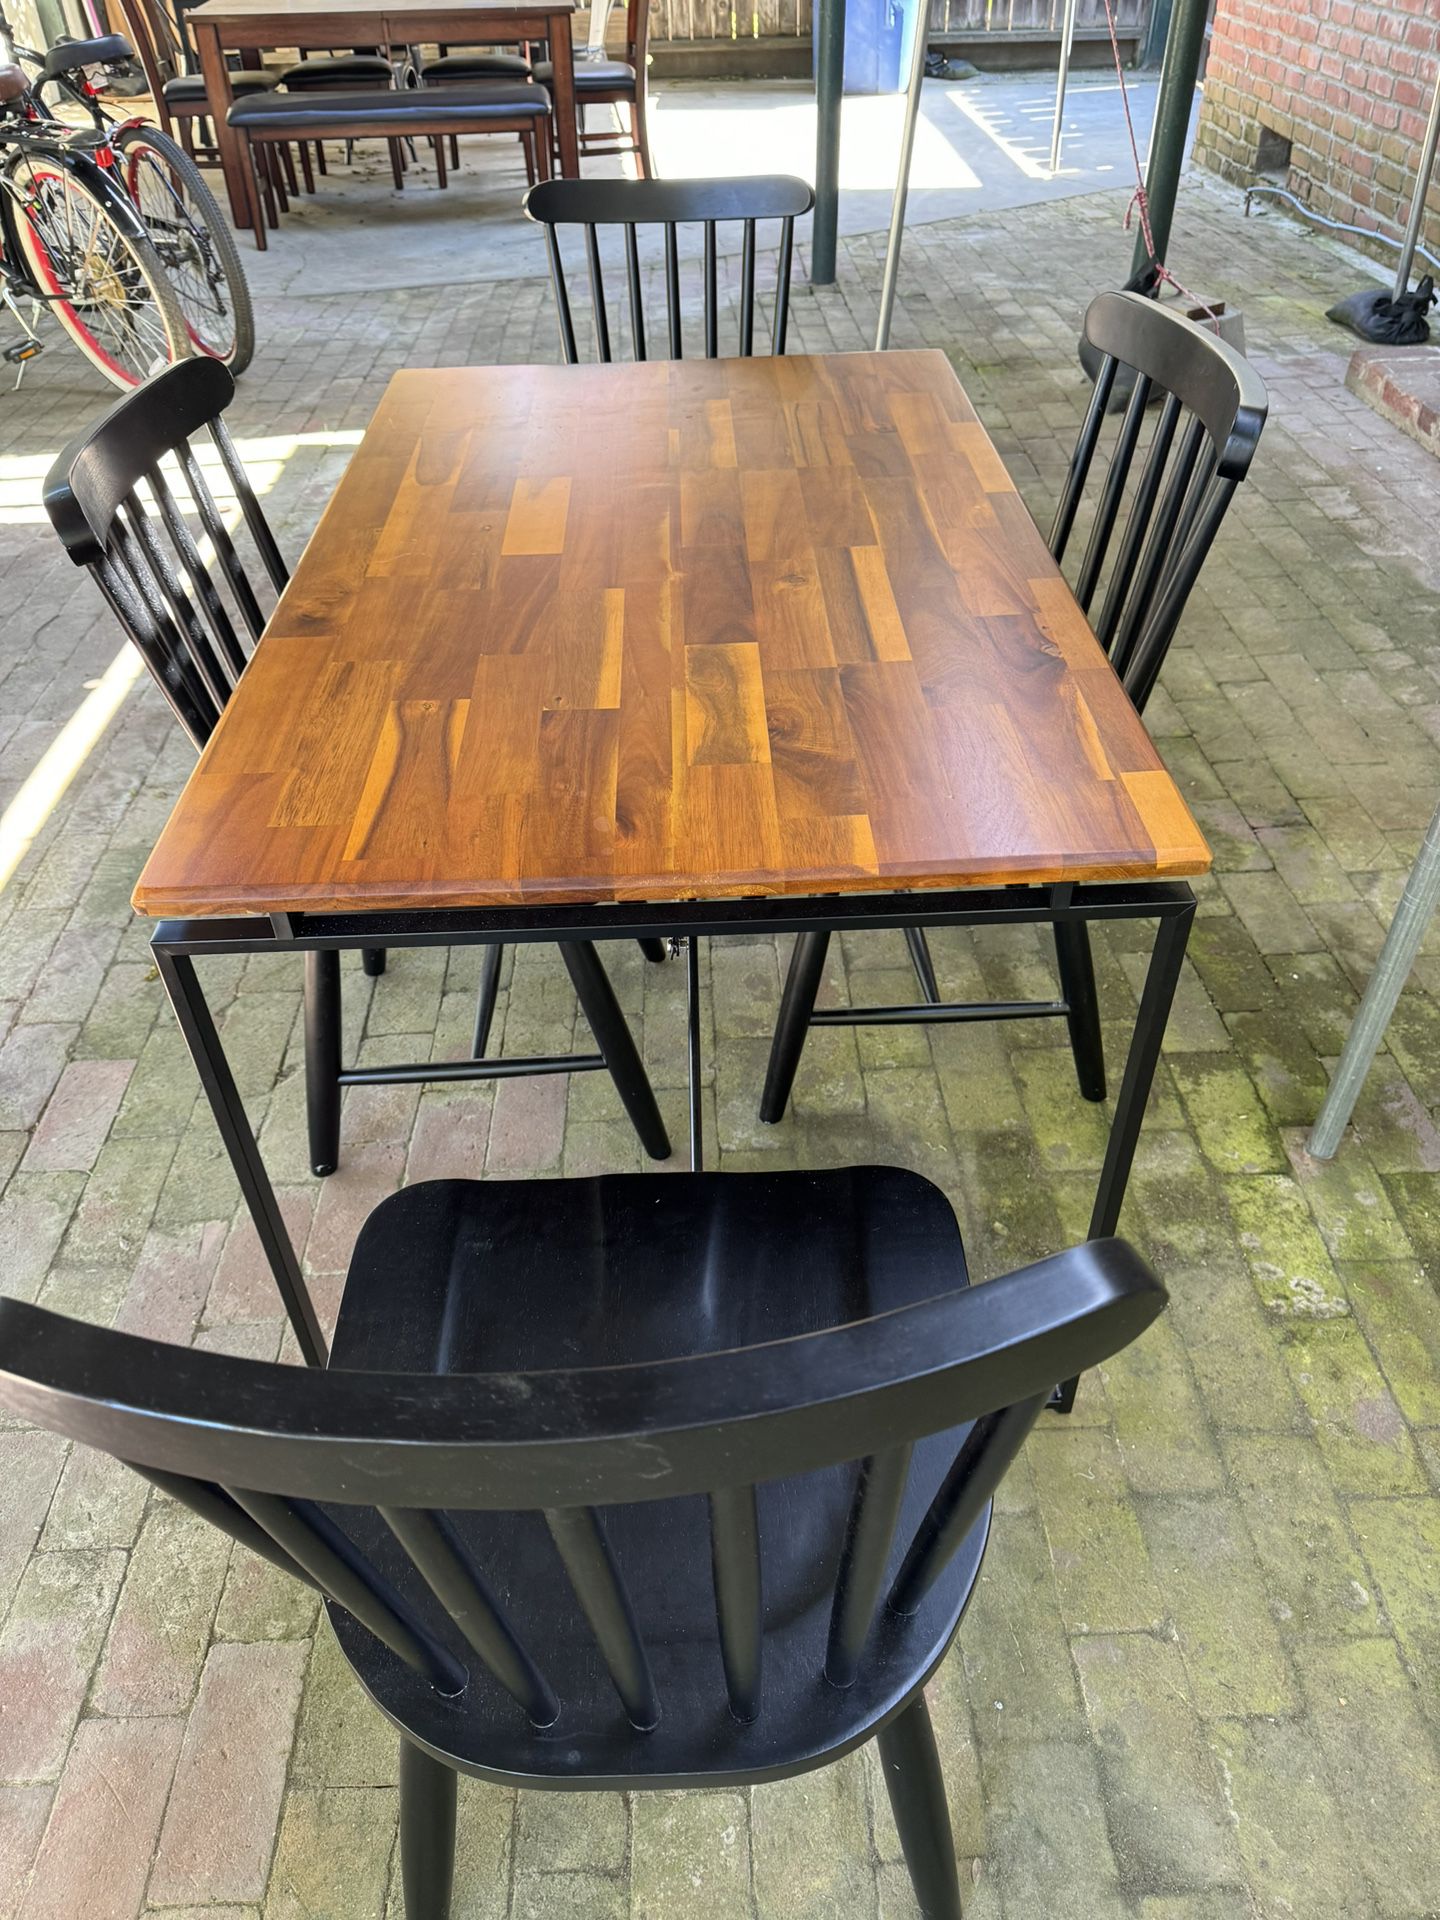 APARTMENT SIZE DINING TABLE WITH CHAIRS 